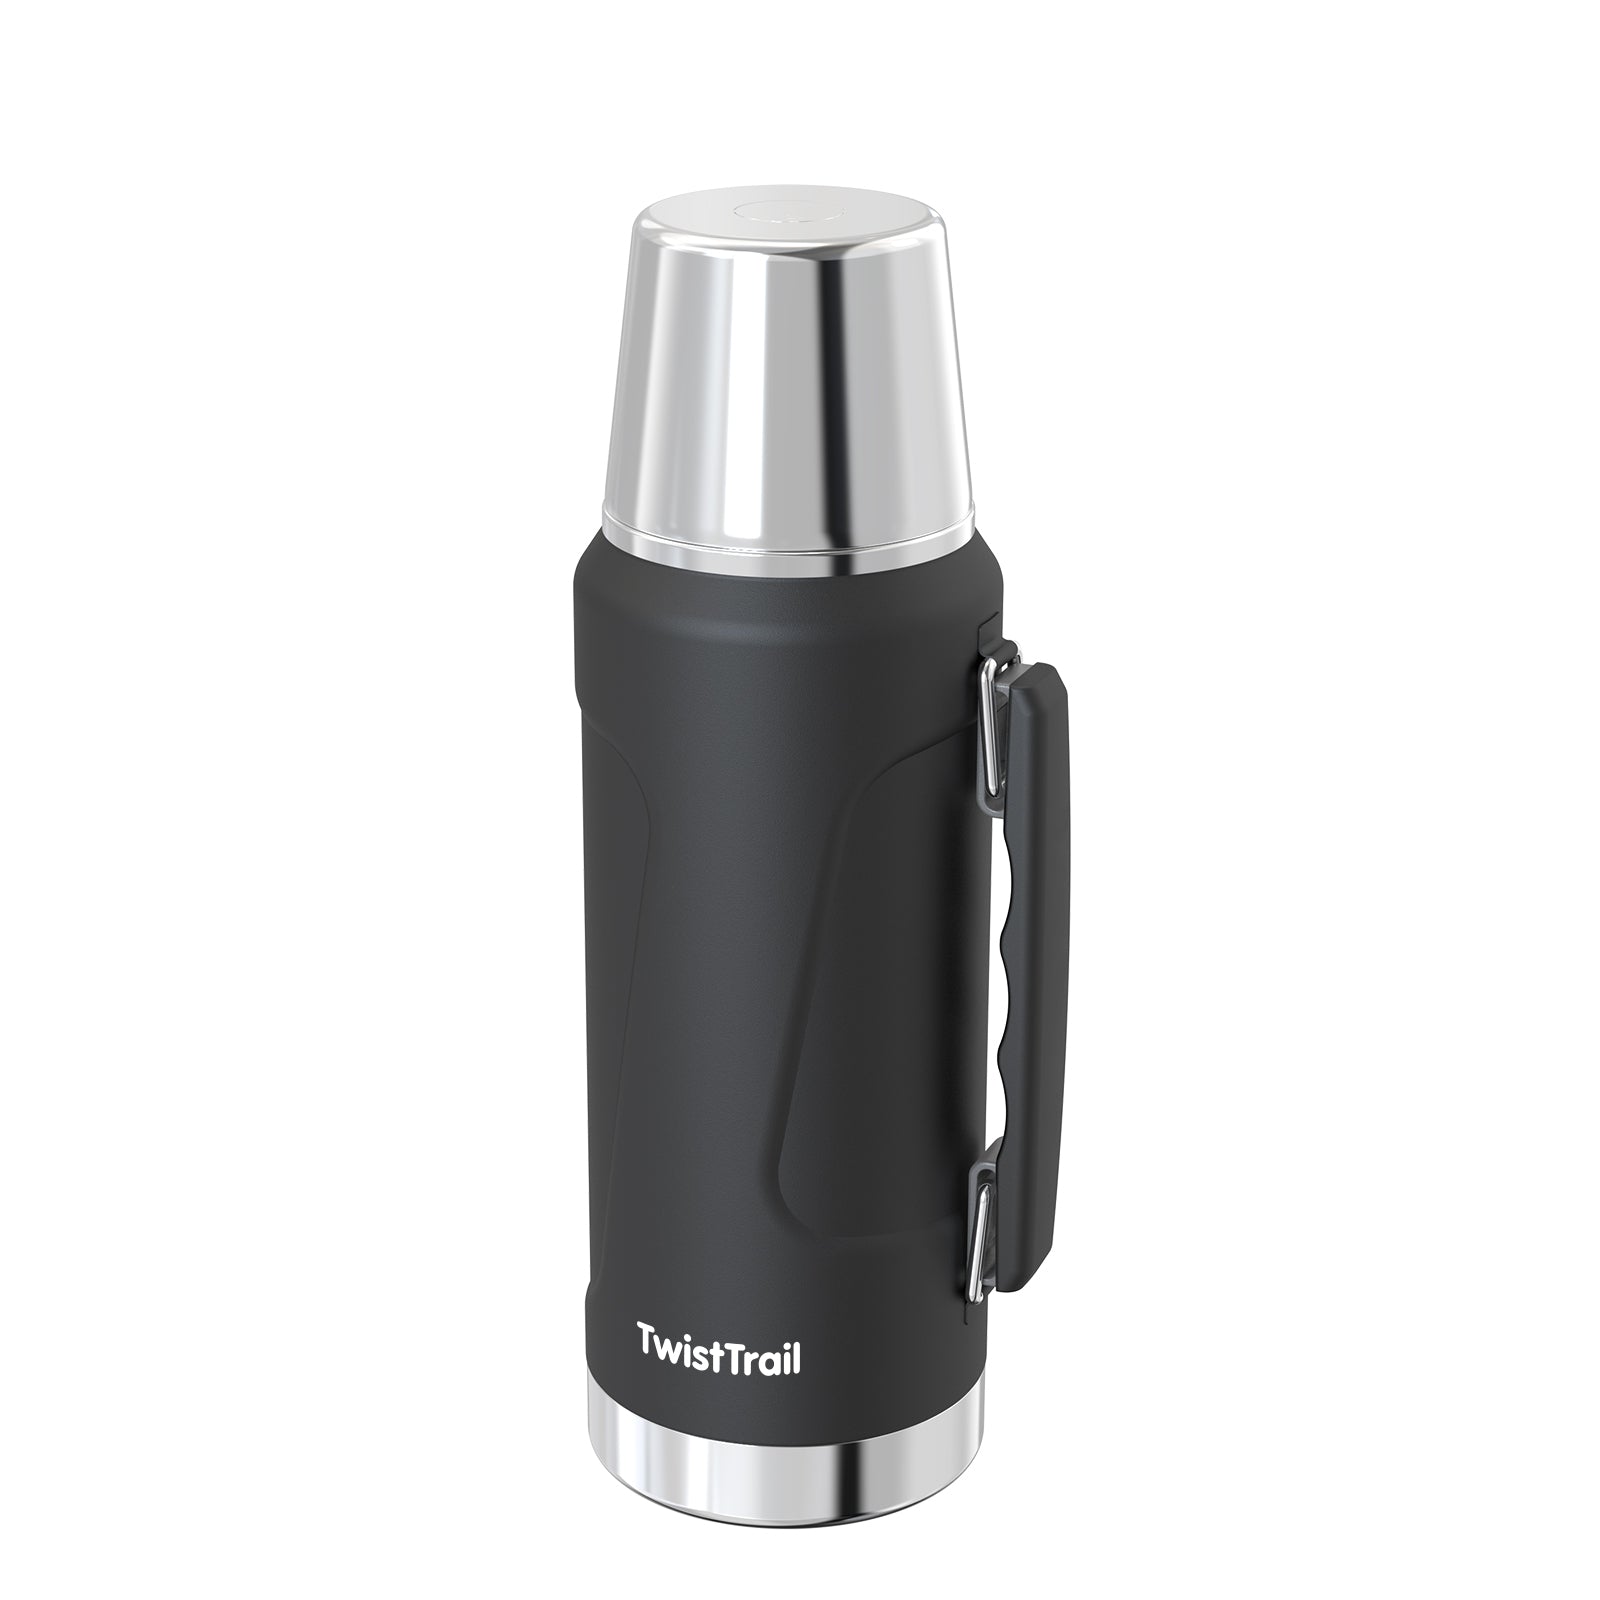 TwistTrail™ Flask，HANDHELD THERMOS，LEAKPROOF LID DOUBLES AS CUP，32OZ / 1000ML